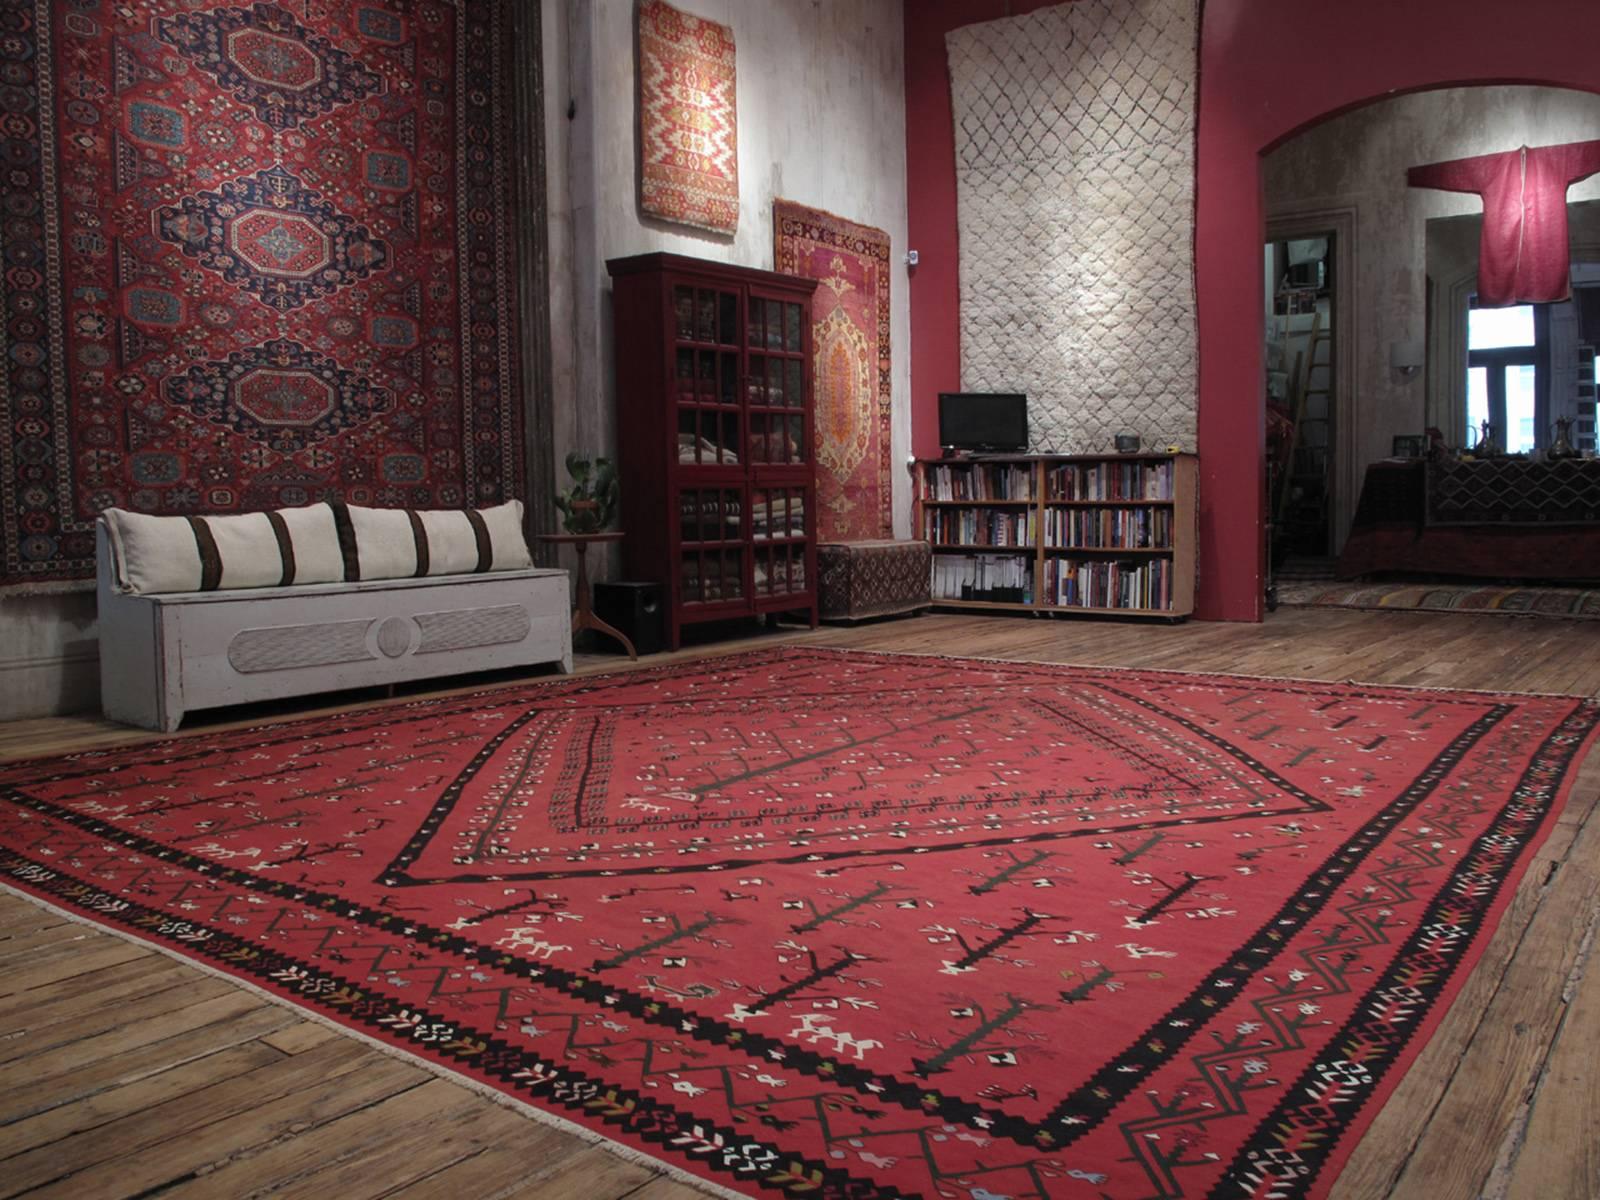 Large Sharkoy Kilim rug. A very large, finely woven Kilim rug from the border region between Serbia and Bulgaria, once part of the Ottoman Empire, where large kilims were woven for centuries as highly sought after floor covers. The designs,